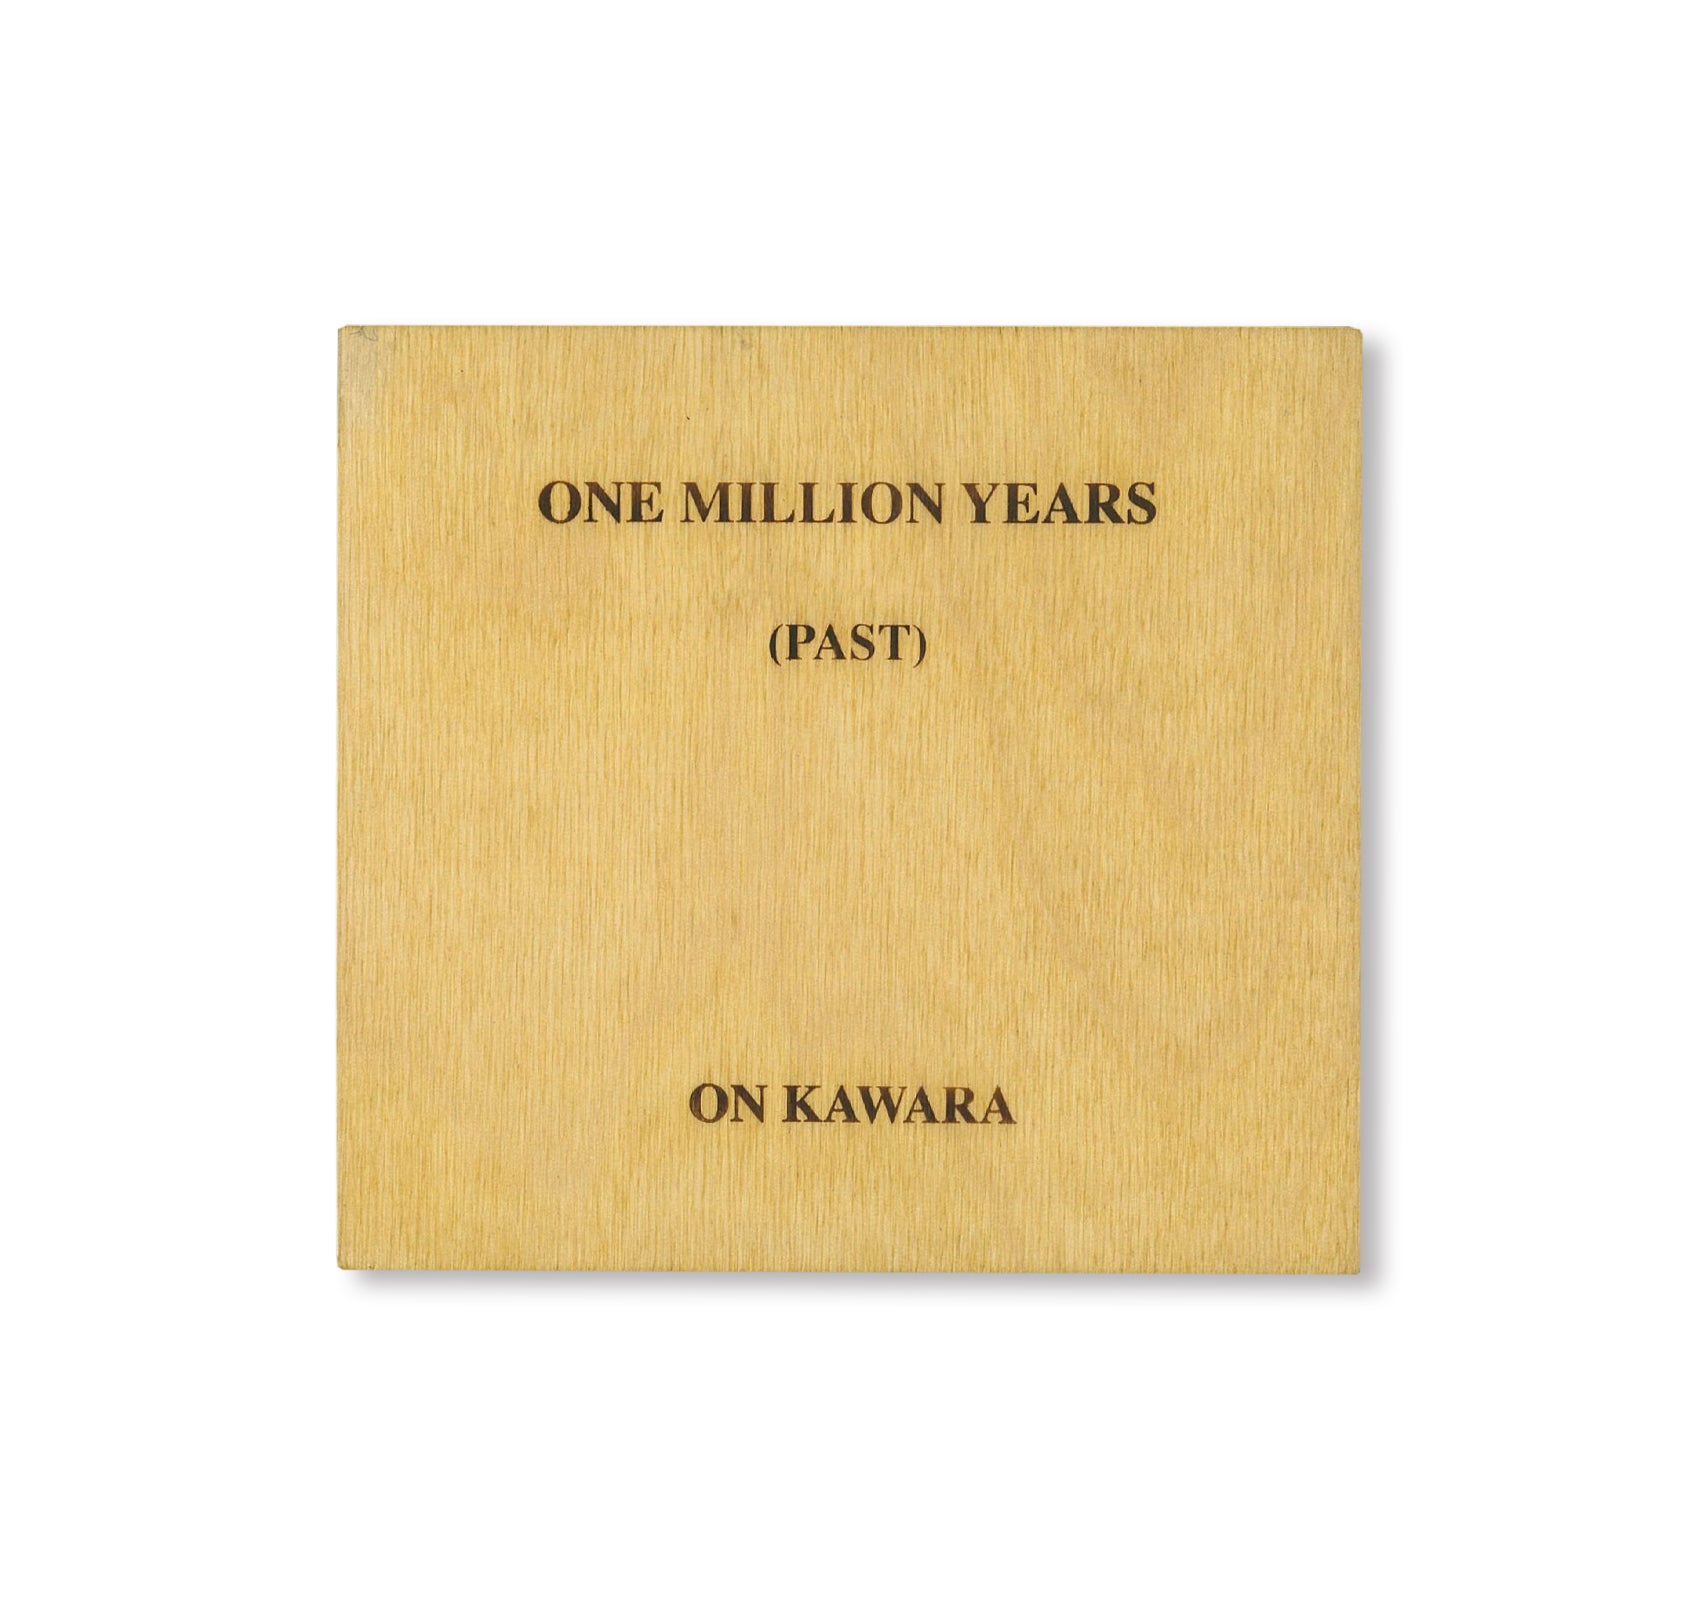 ONE MILLION YEARS (PAST & FUTURE) by On Kawara